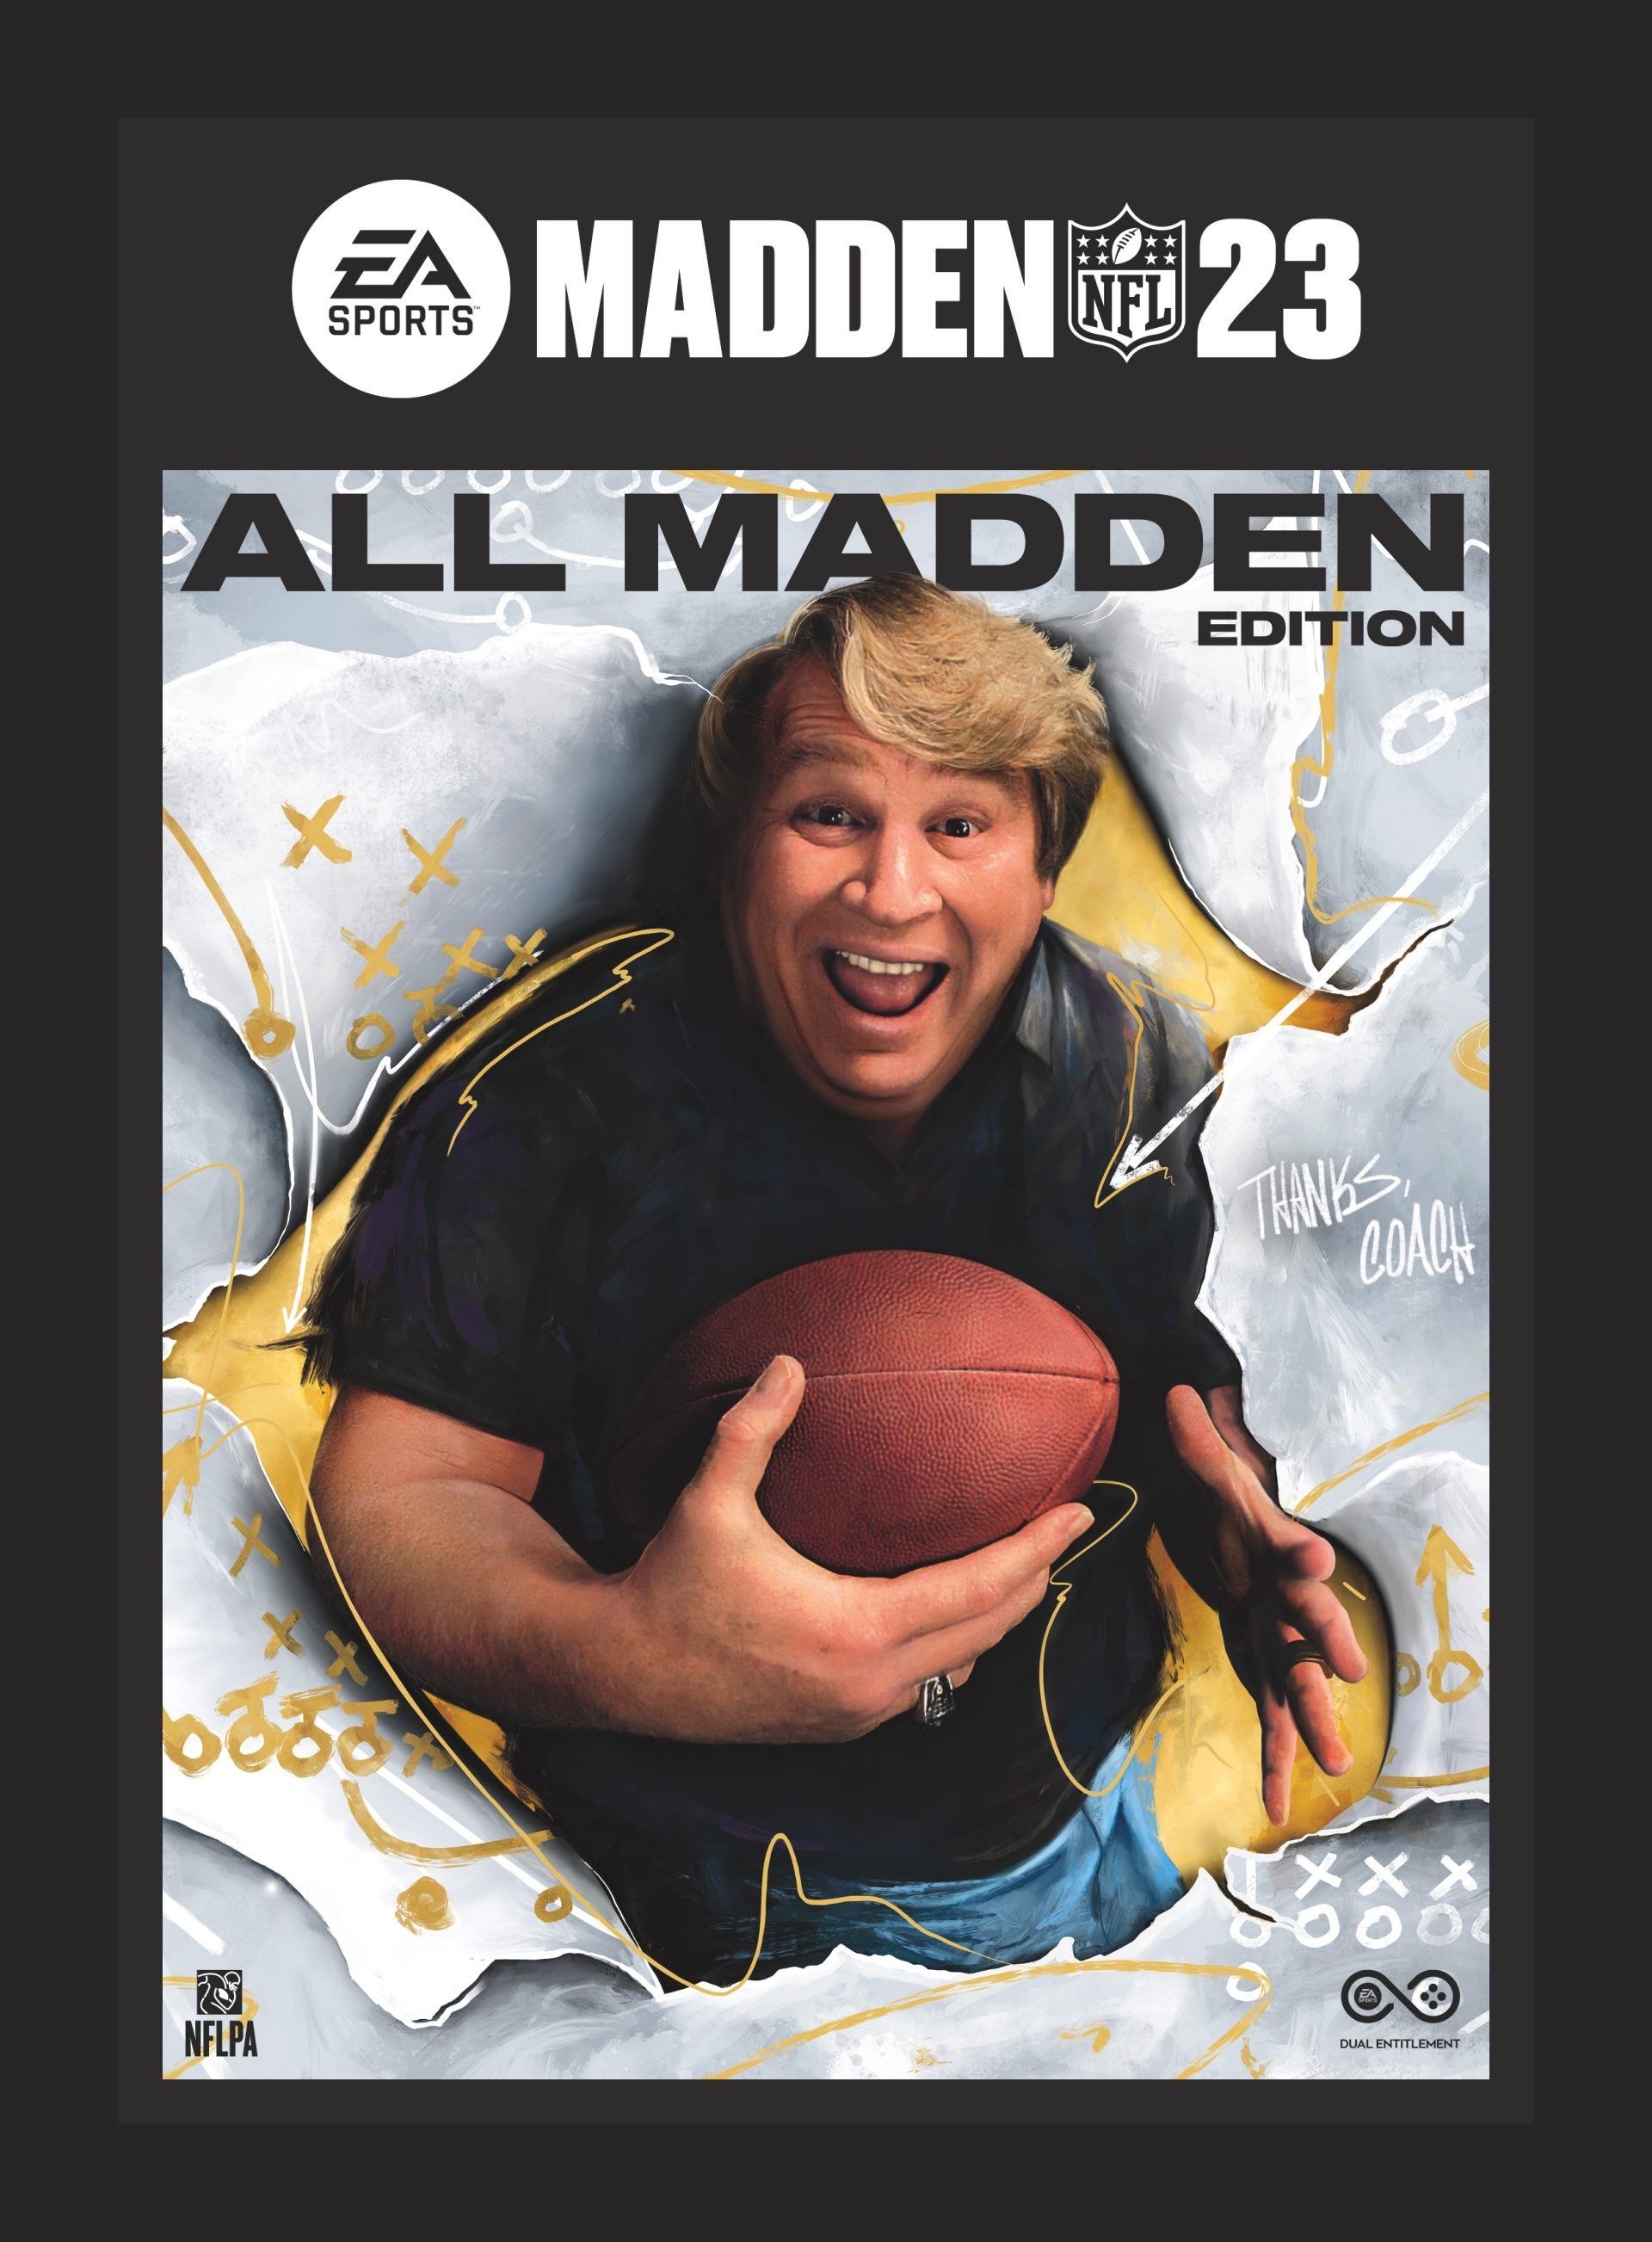 The late great John Madden is on the cover of NFL 23 The Golden News